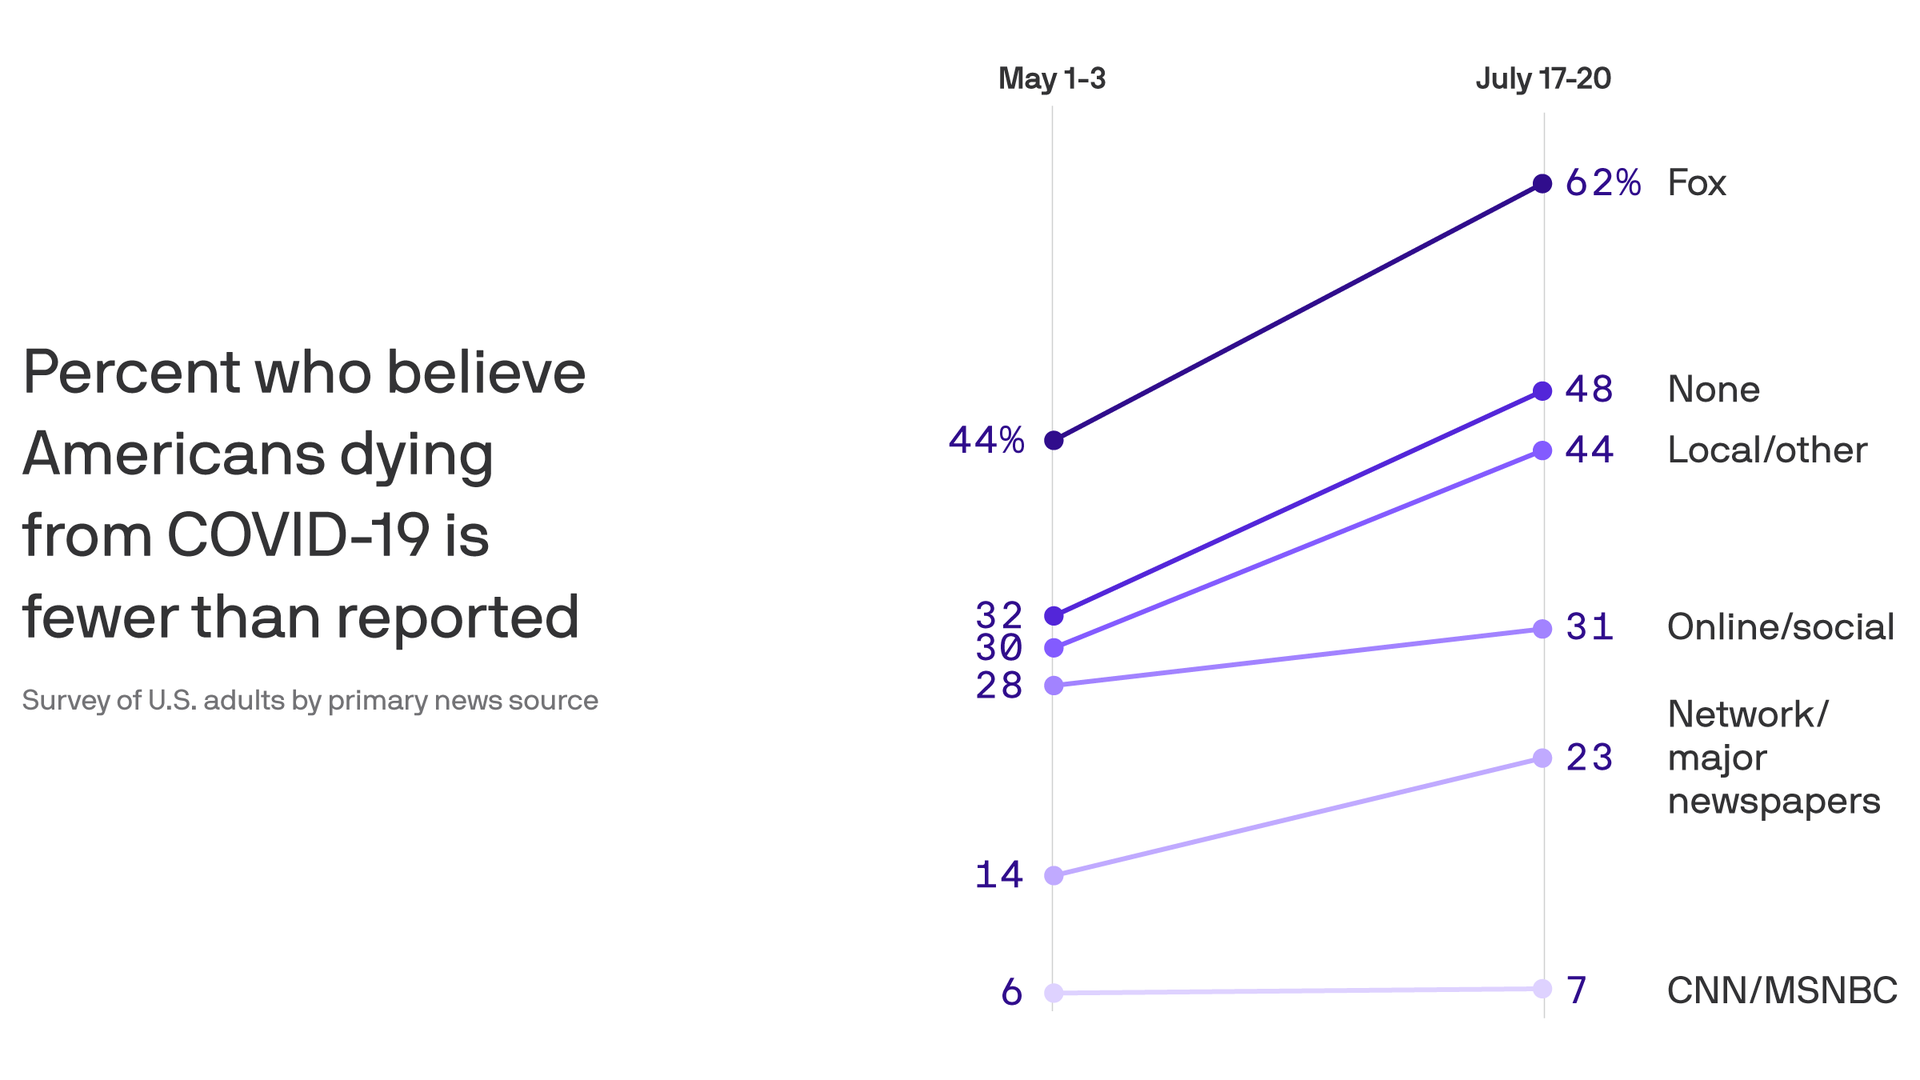 Axios-Ipsos poll: The skeptics are growing